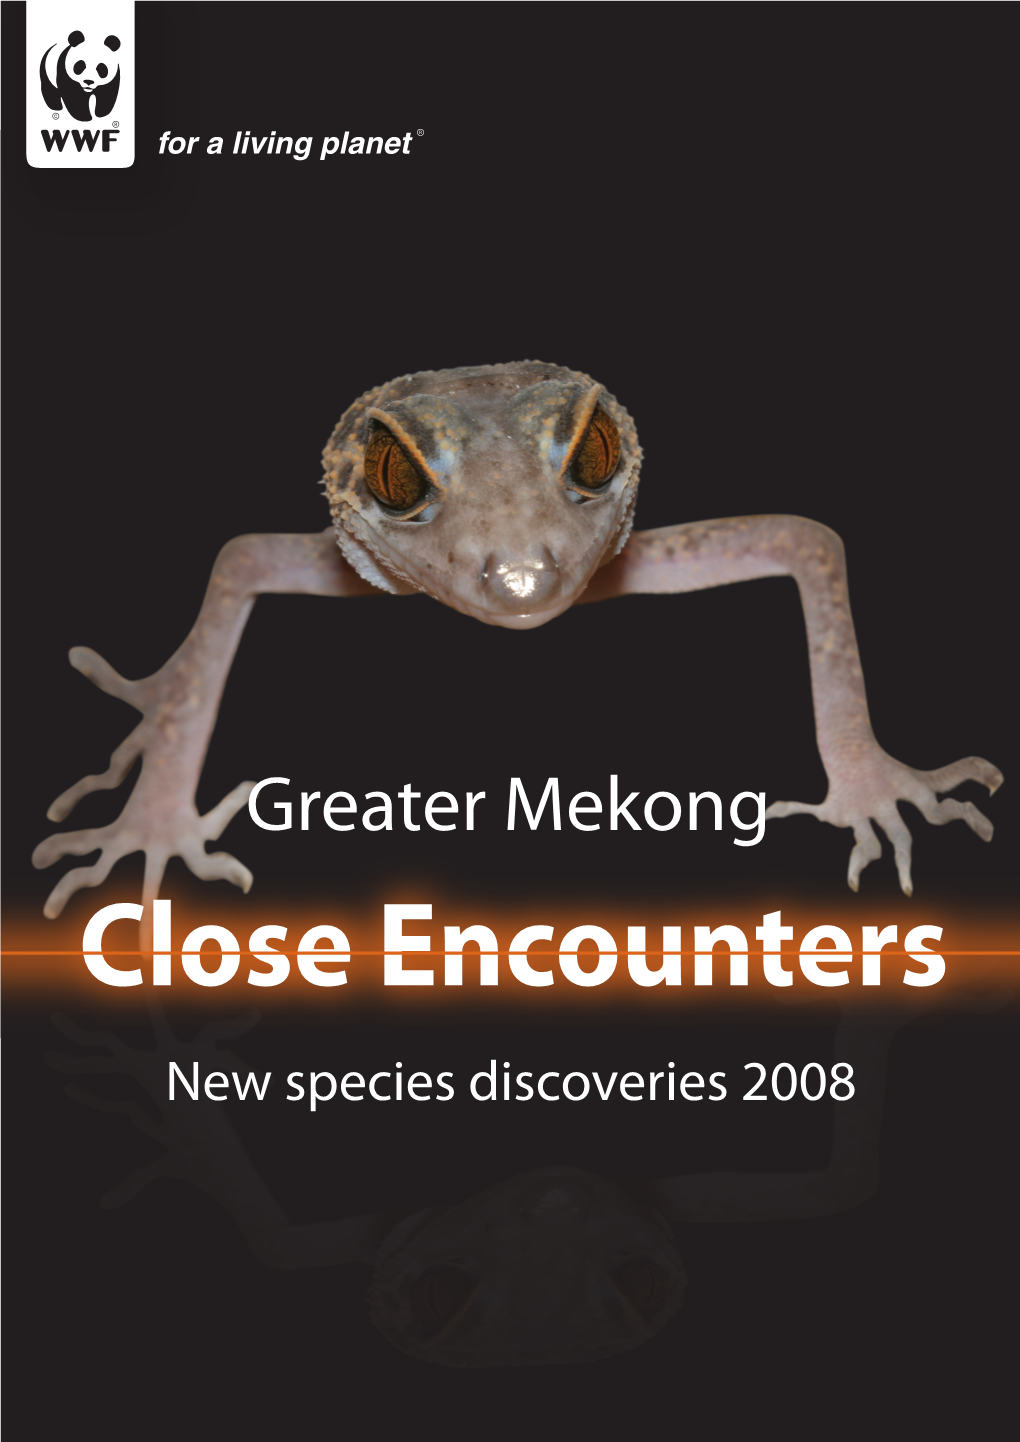 Greater Mekong: Close Encounters, New Species Discoveries in 2008